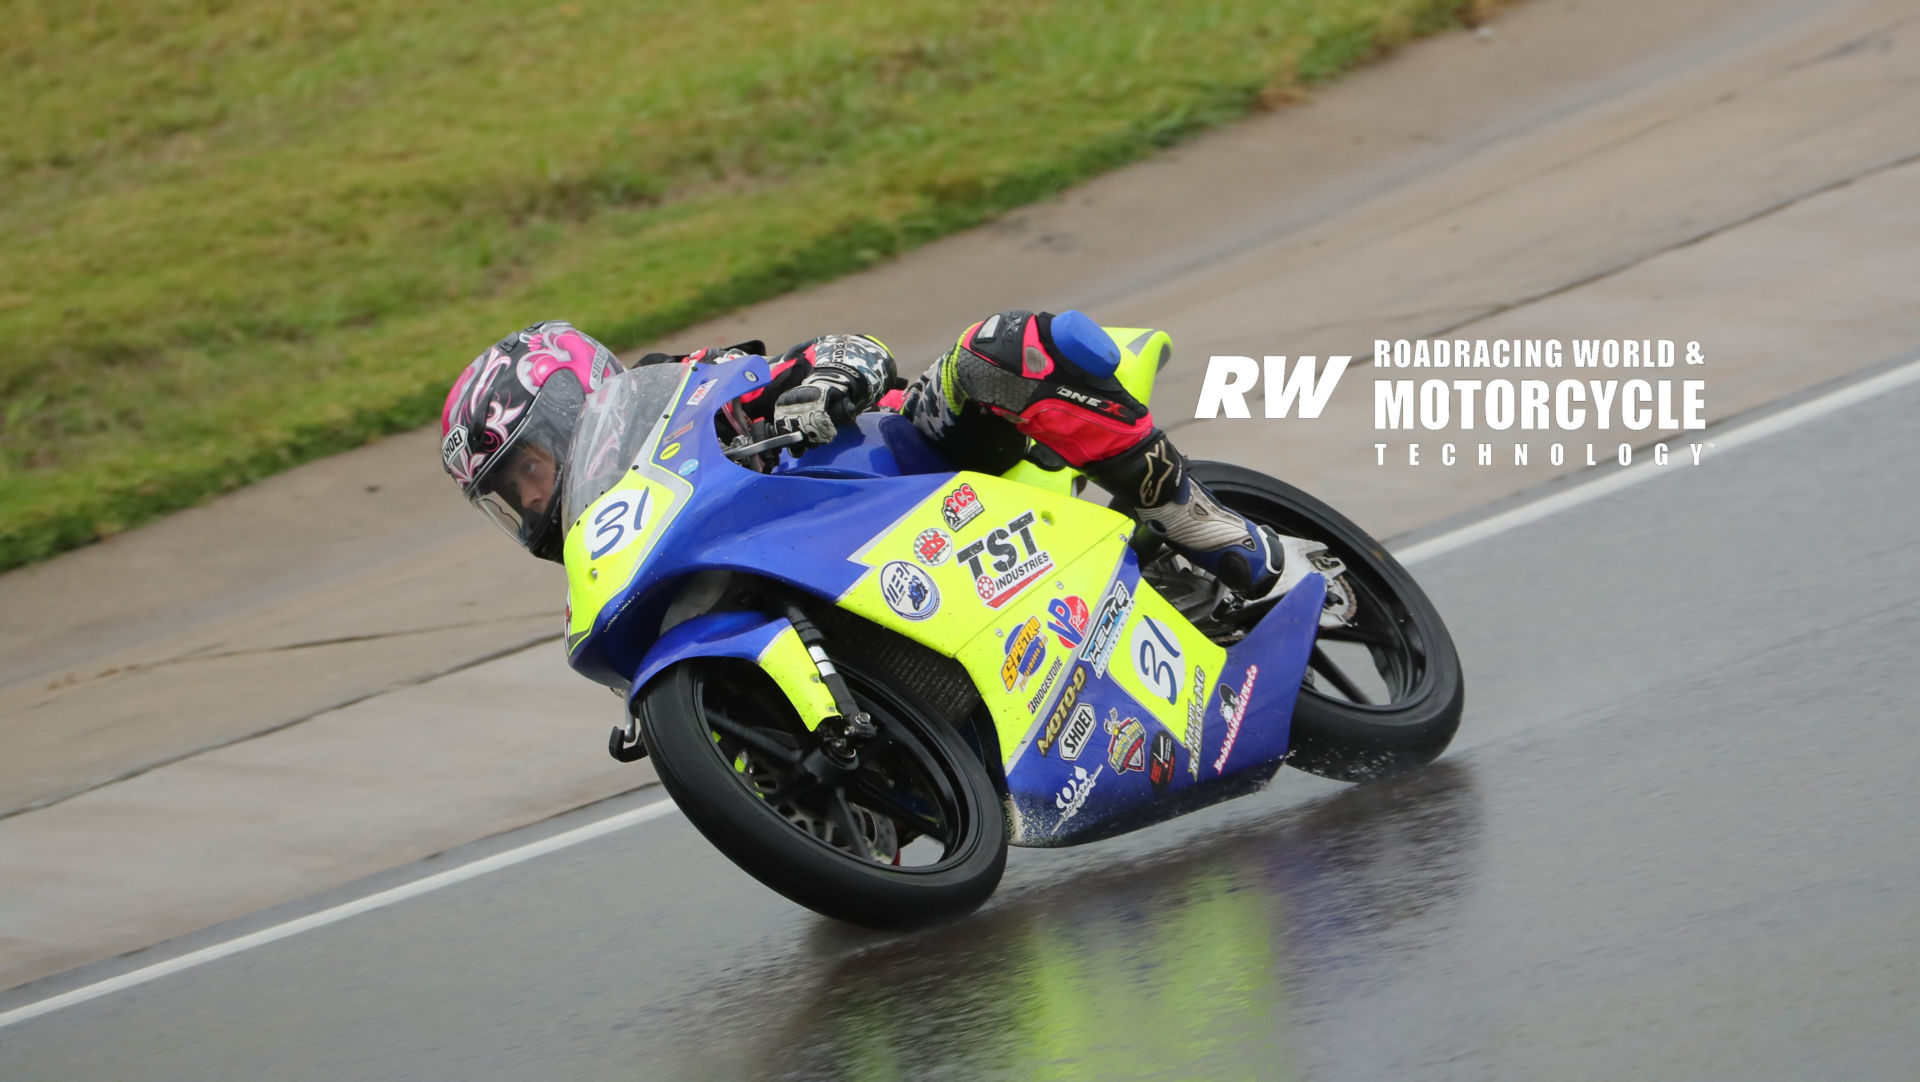 Kayla Yaakov (31) in action during a wet race at the 2019 WERA Grand National Finals (GNF) at Barber Motorsports Park. Photo by Brian J. Nelson.